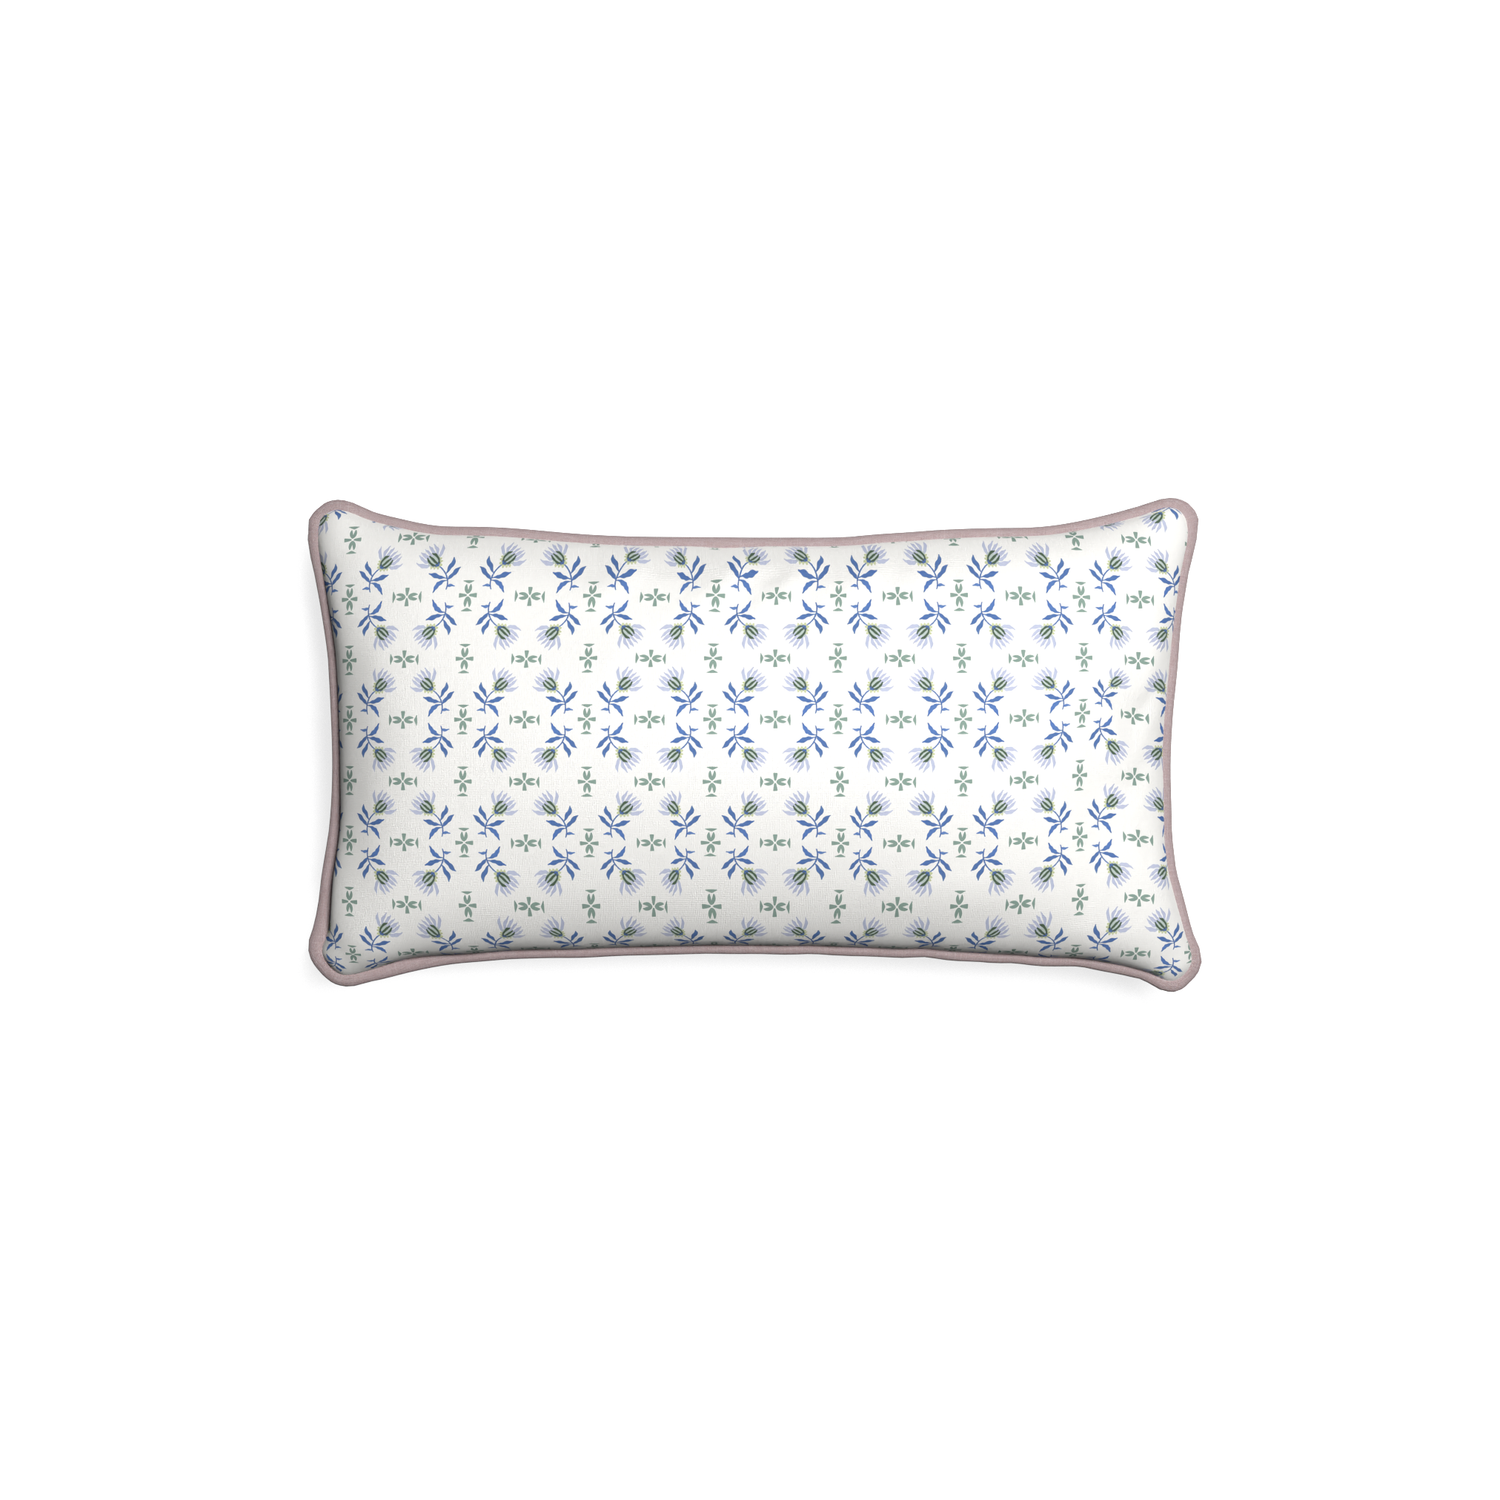 Petite-lumbar lee custom blue & green floralpillow with orchid piping on white background